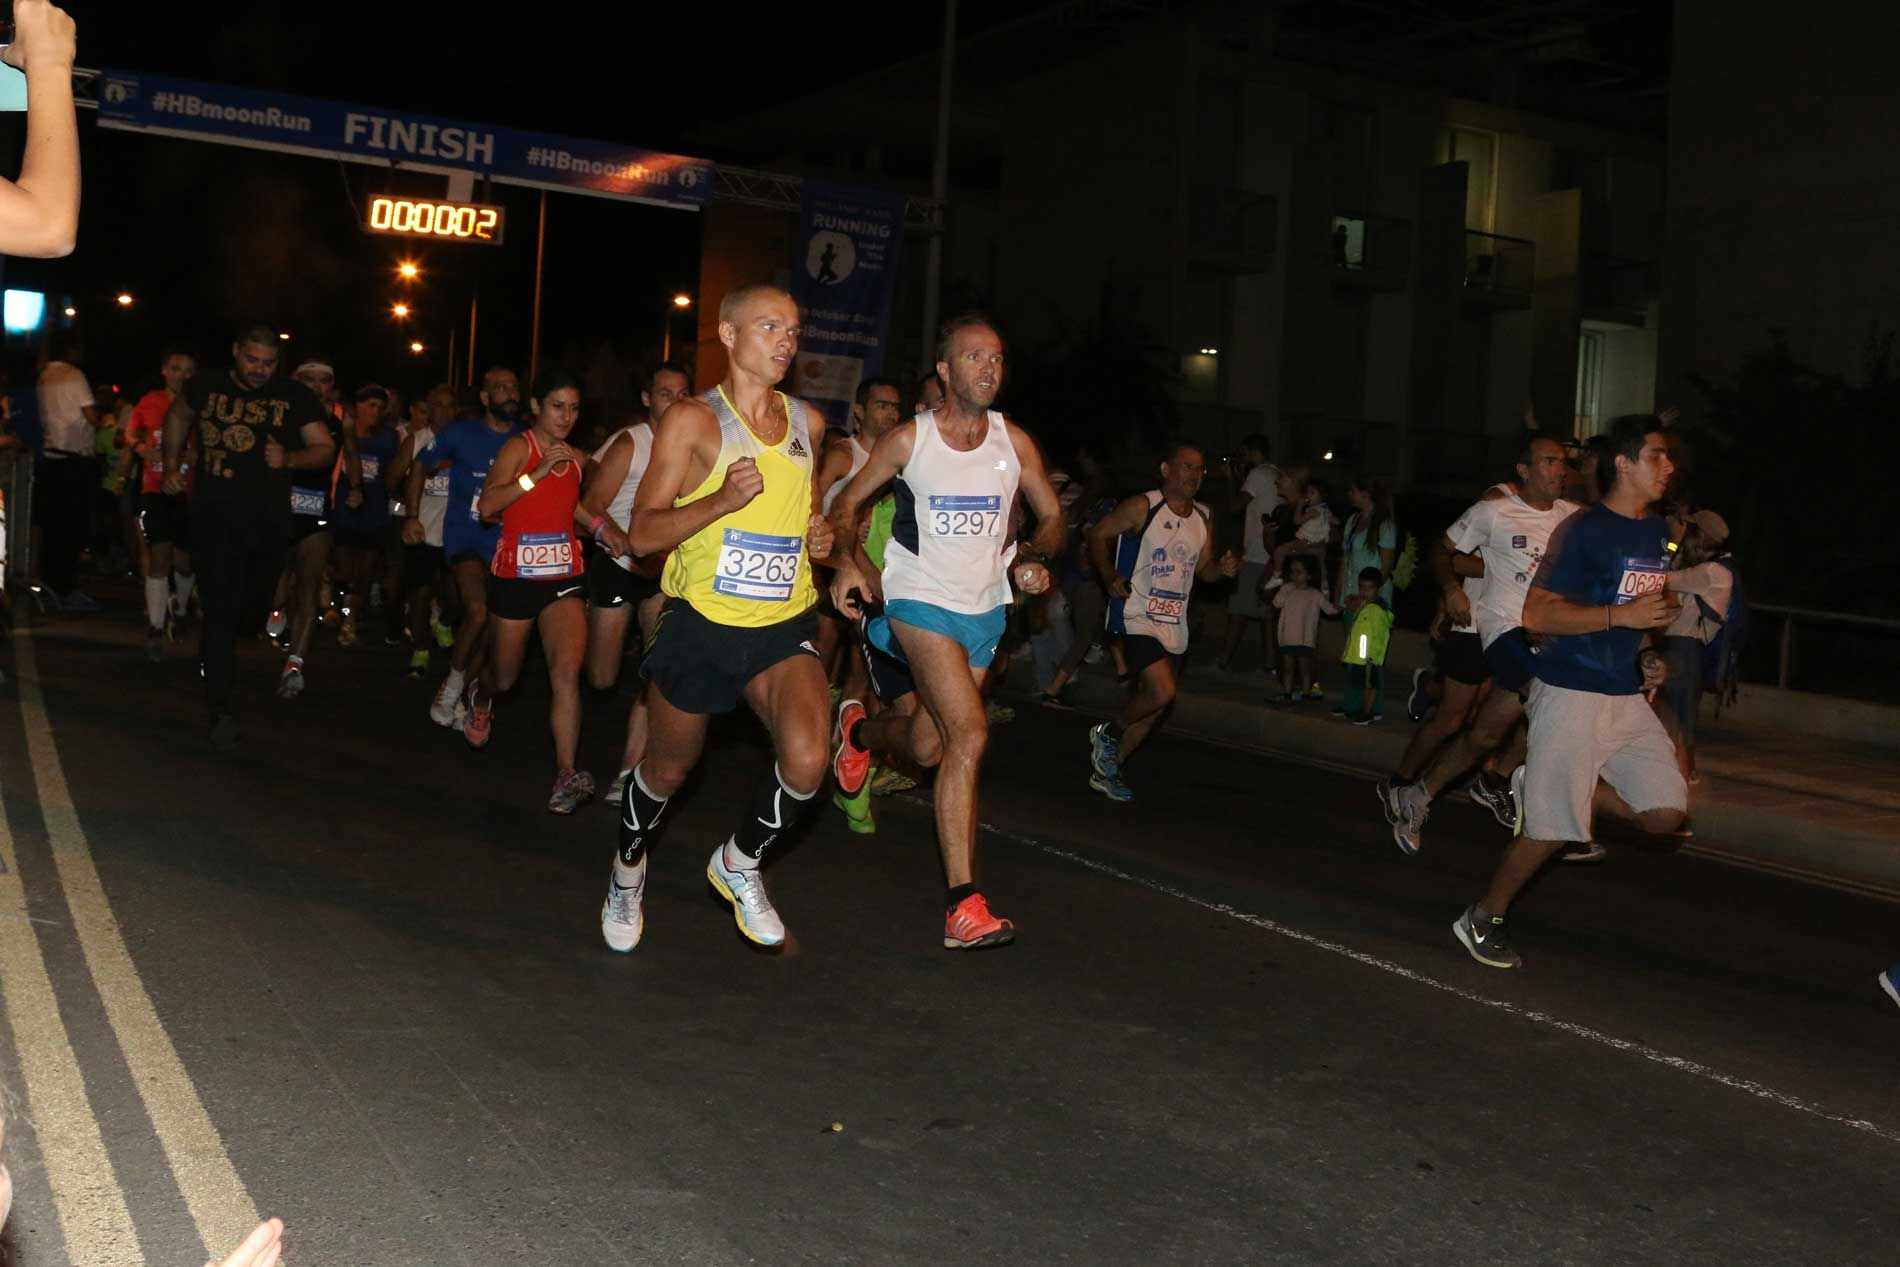 Running Under The Moon - with Hellenic Bank 